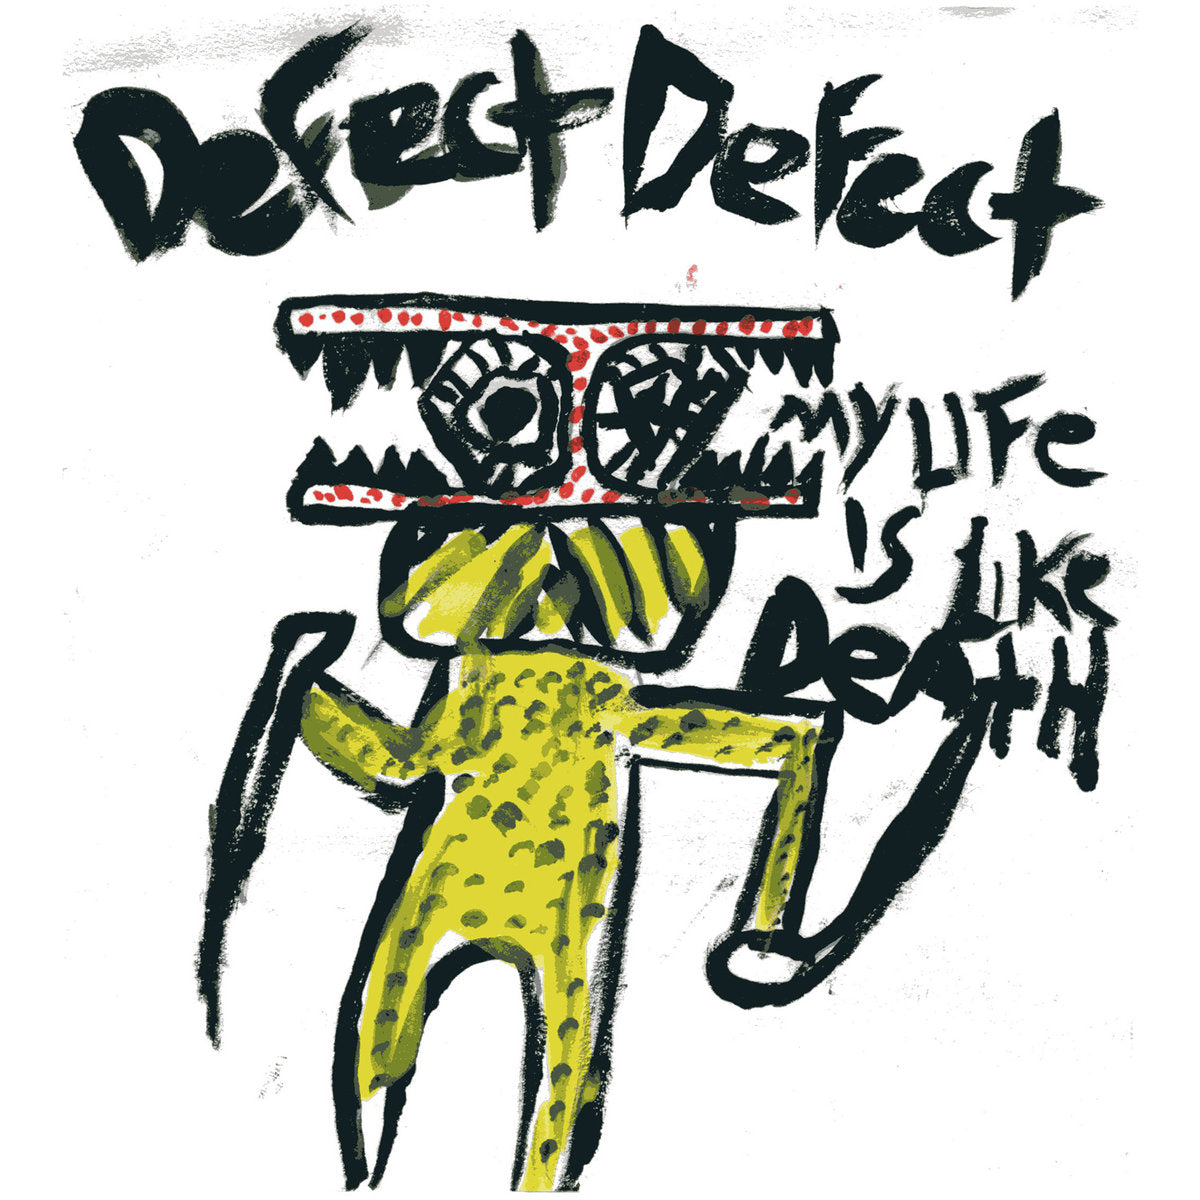 Defect Defect- My Life Is Like Death 7” ~EX ARCTIC FLOWERS!